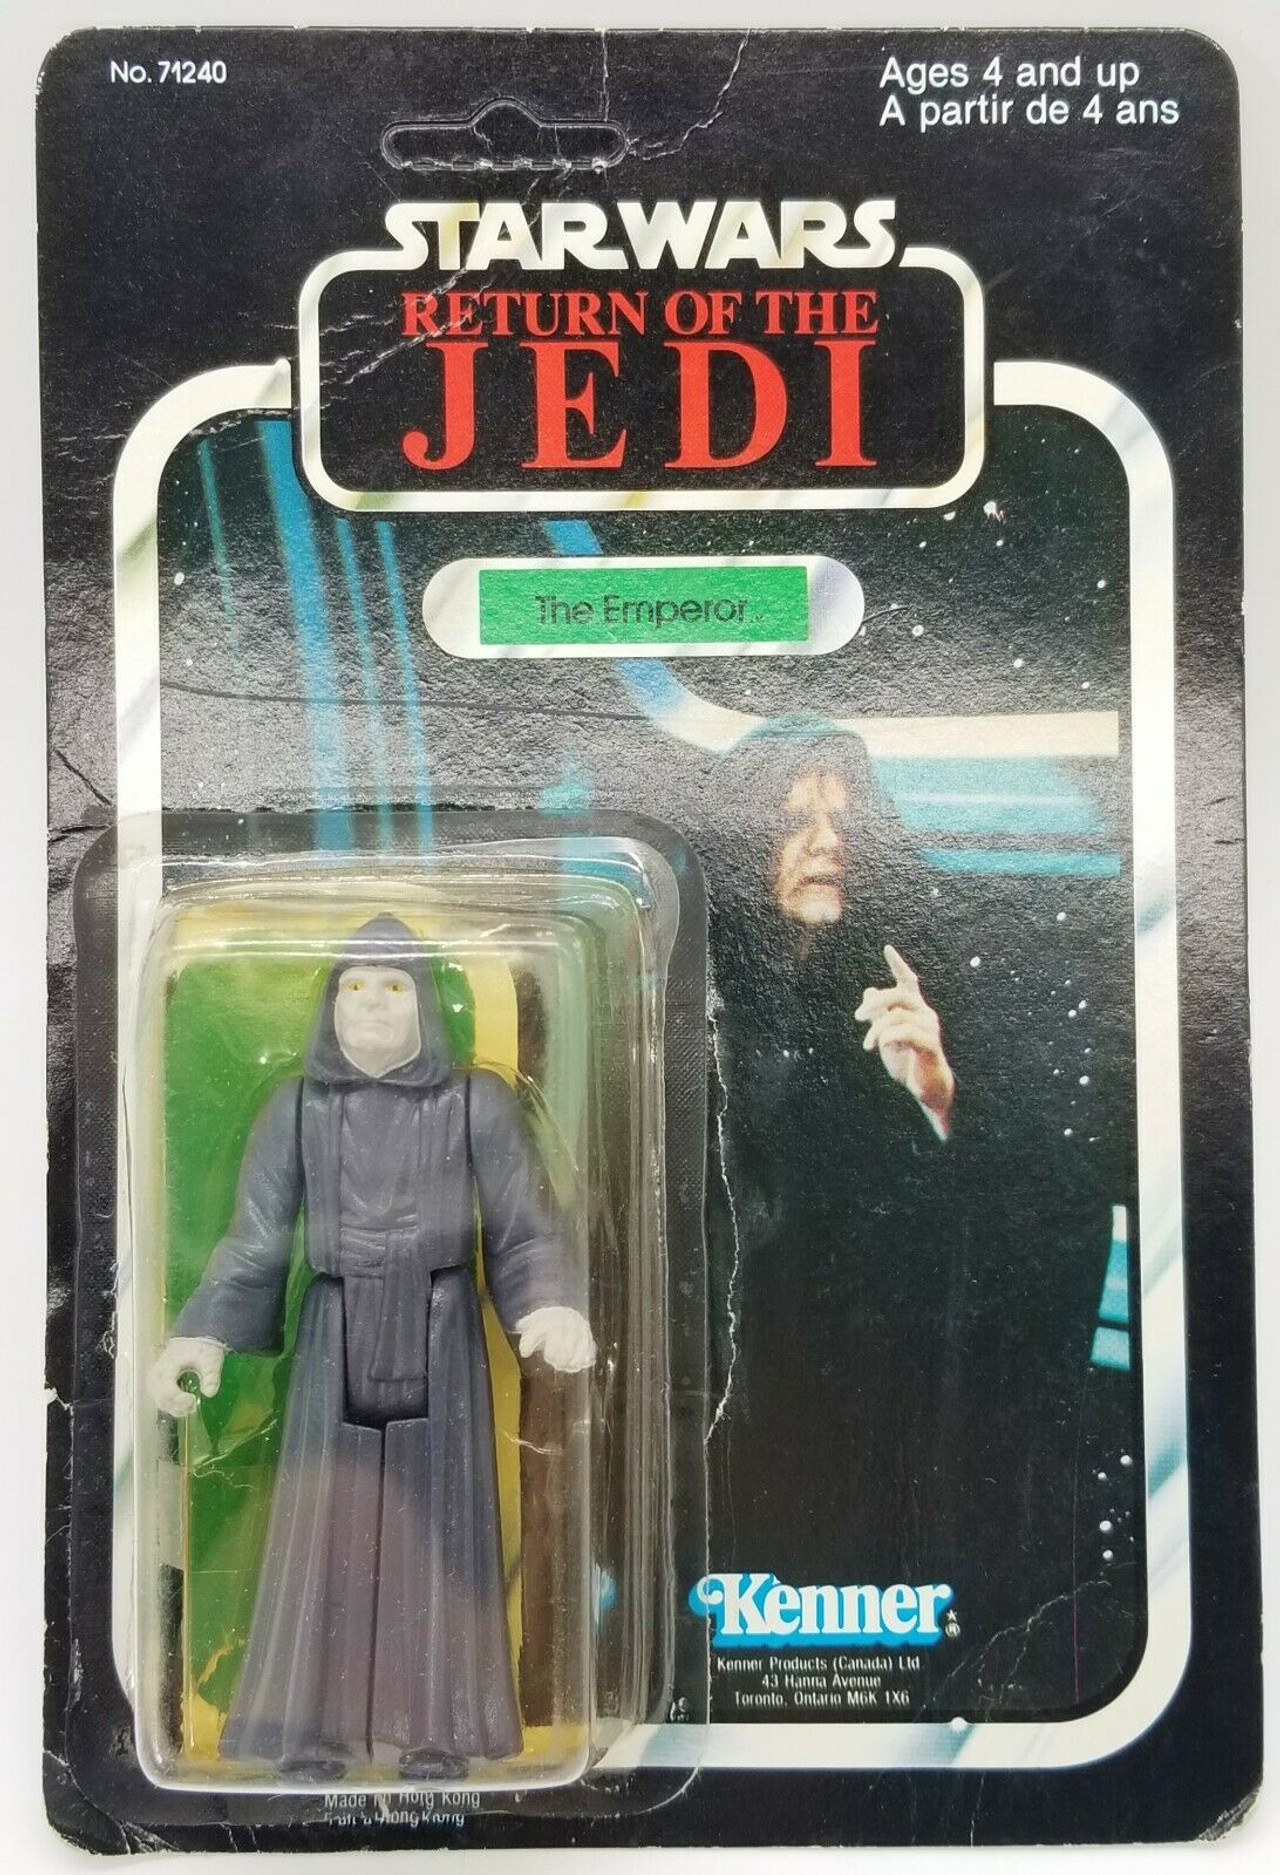 Star Wars 1983 The Emperor Palpatine 3.75" Action Figure Kenner No ... - 31aeD3a6 092a 5bc9 974D 3c8468b4f62b  92871.1629149769